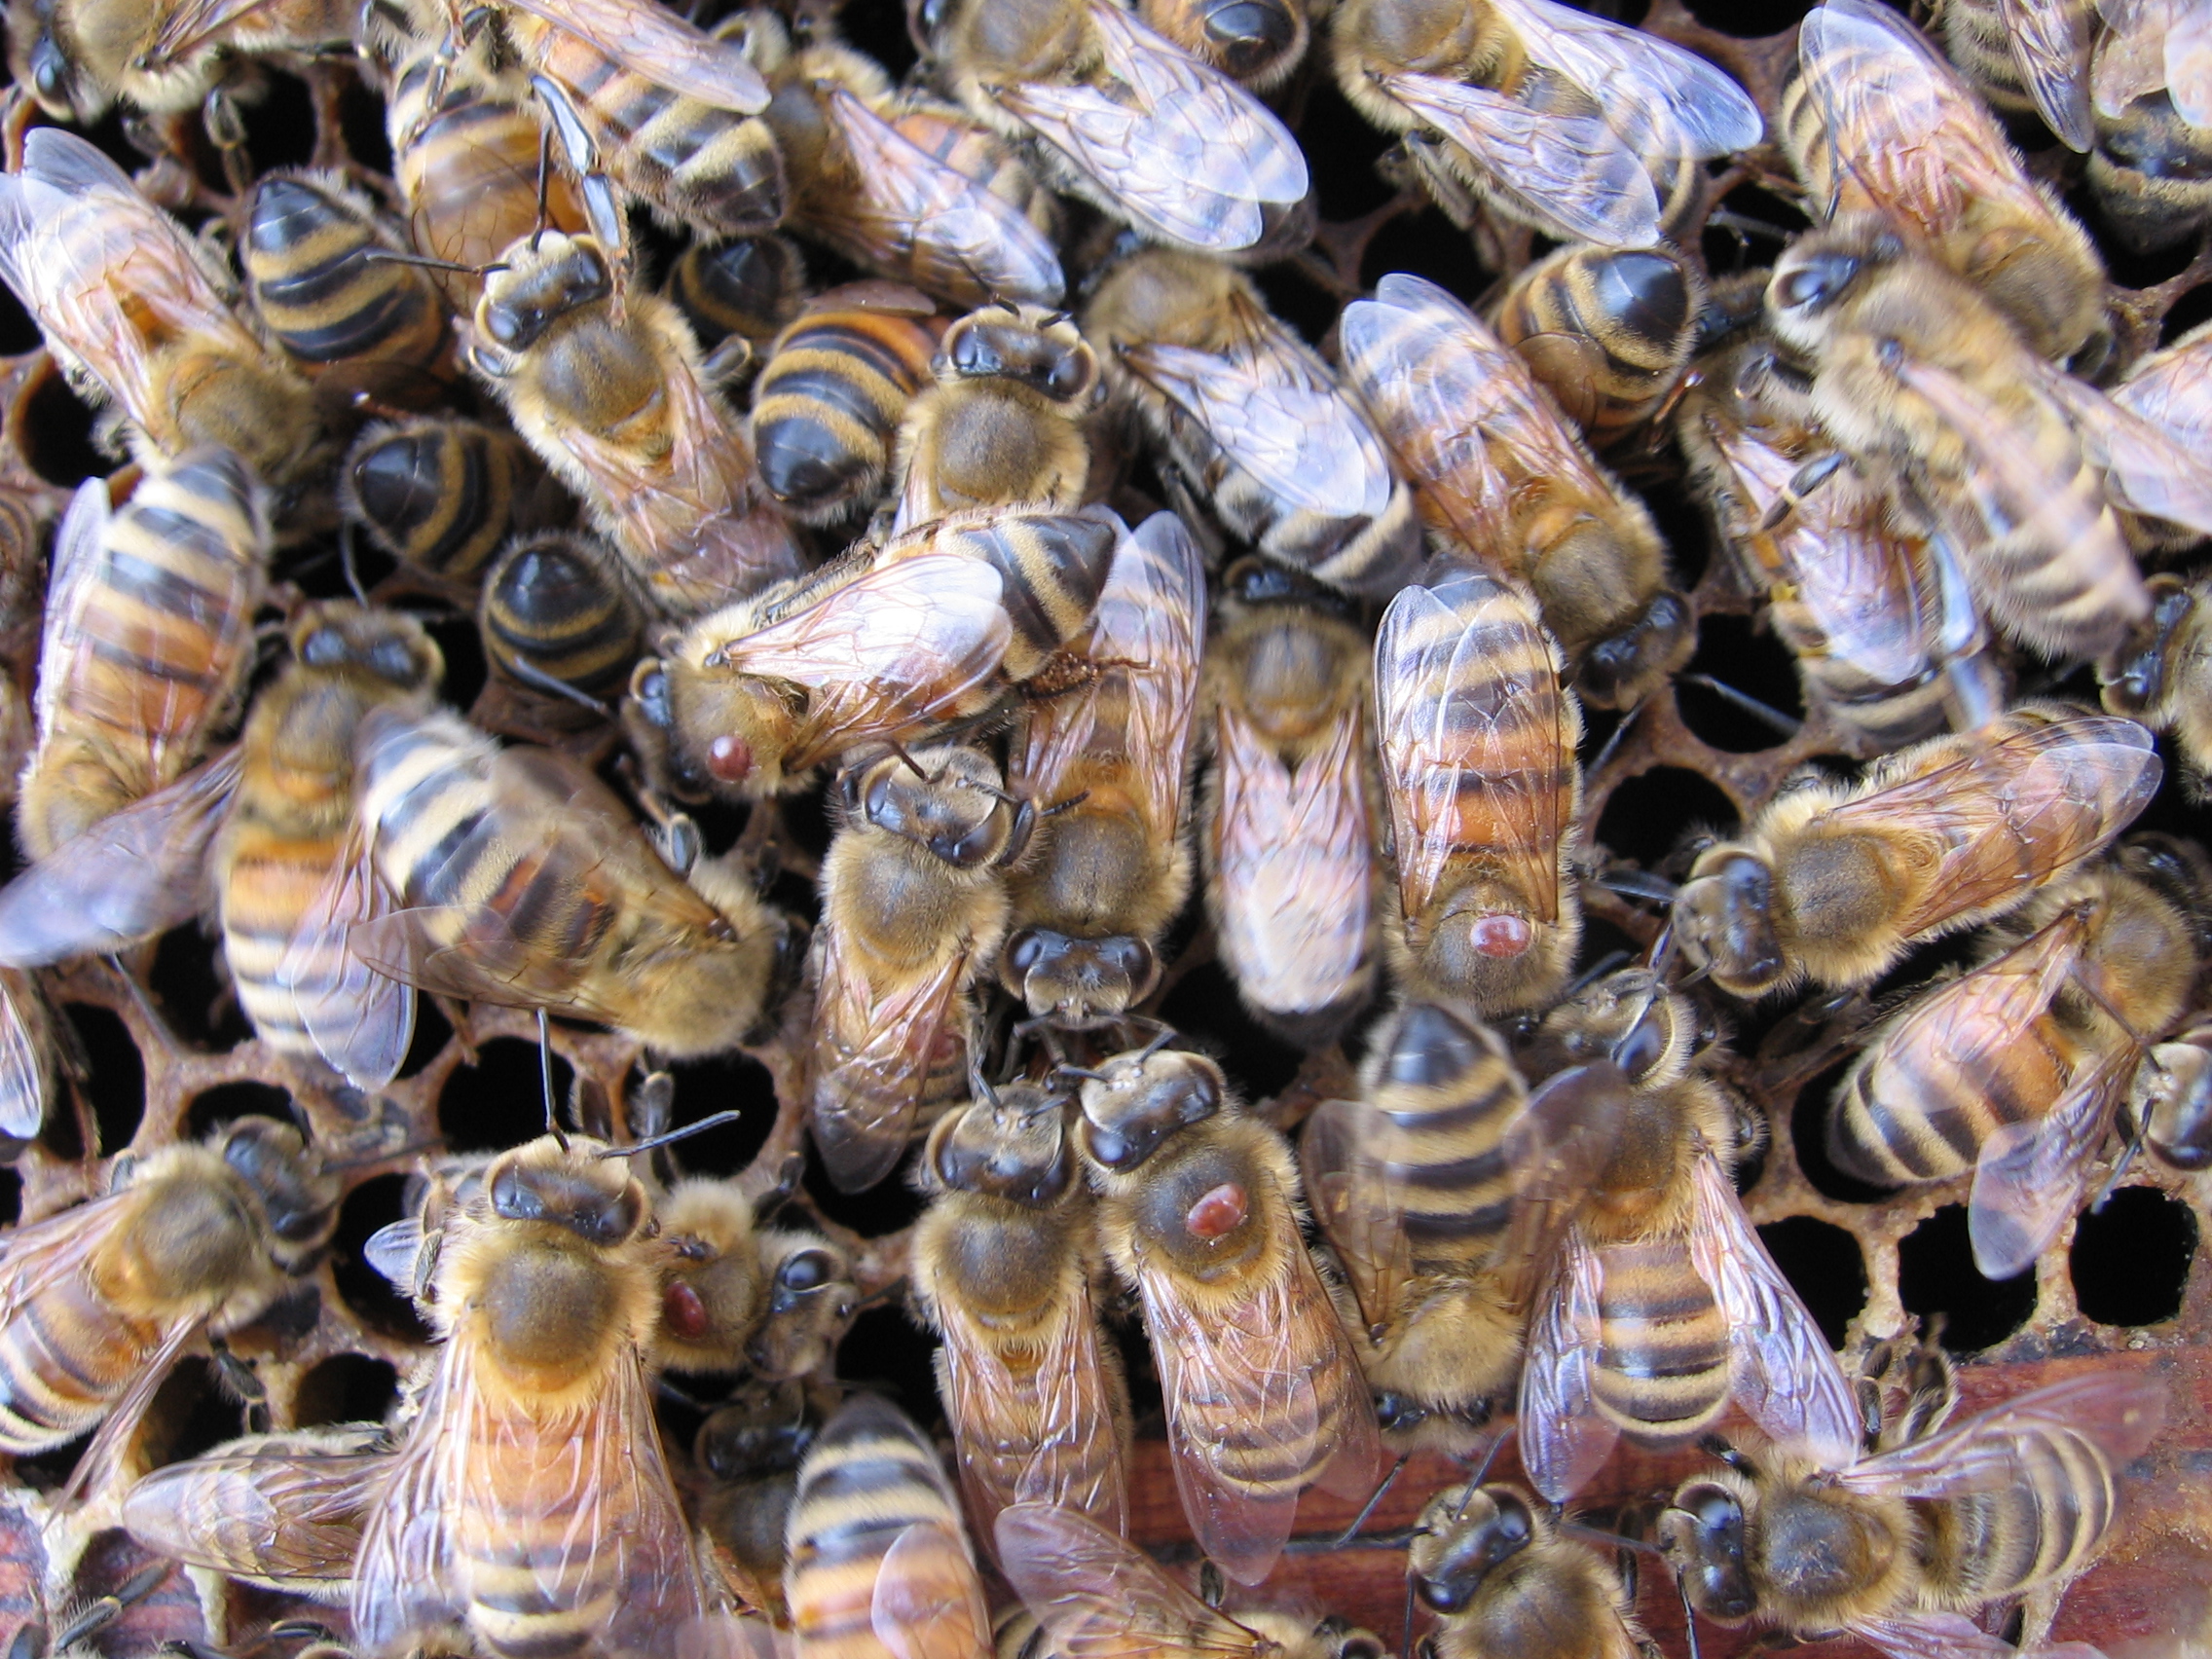 Worker bees in the brood nest with varroa mites attached to their bodies